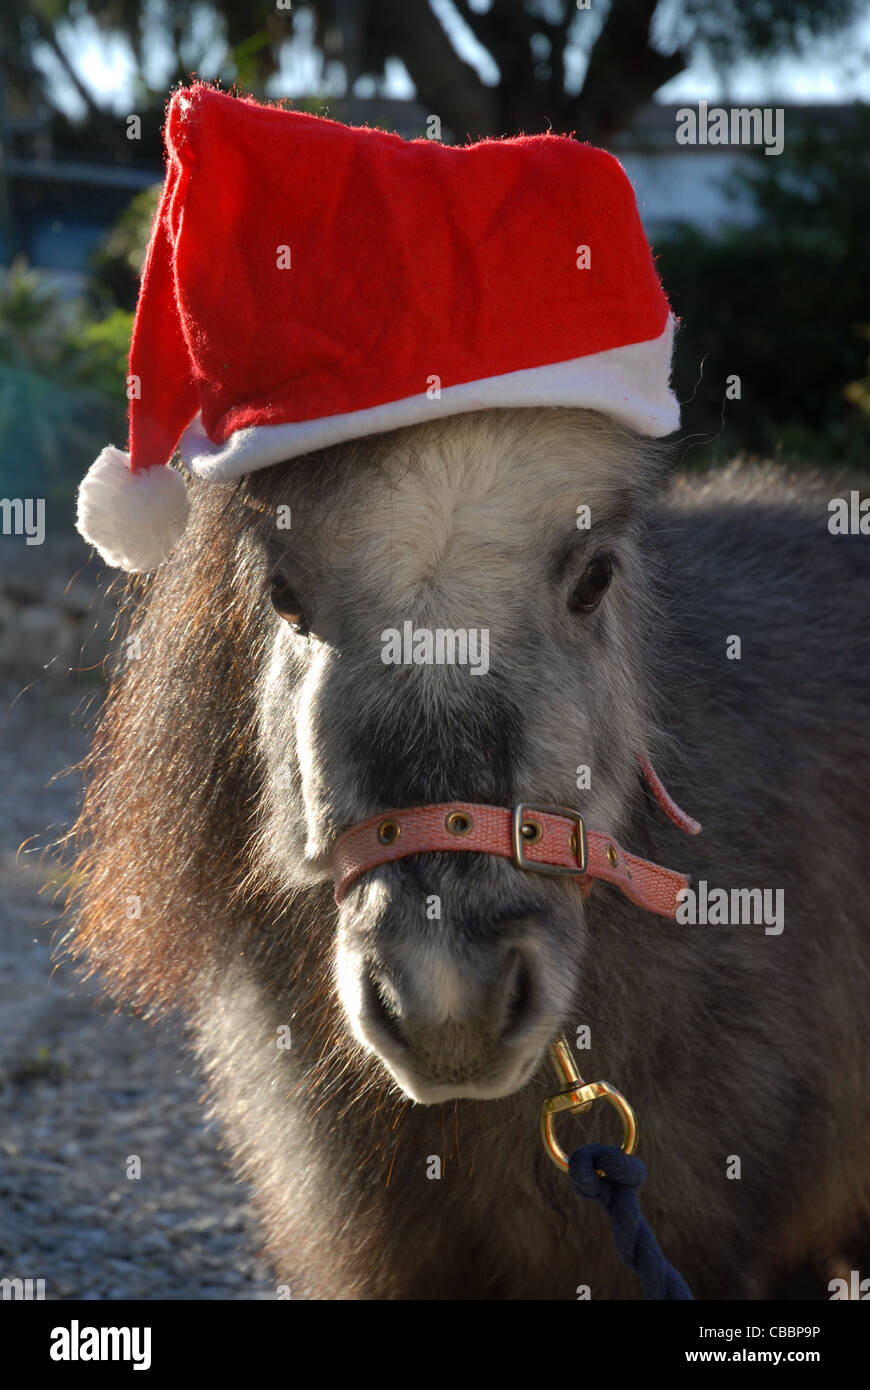 Falabella miniature horse, wearing a Christmas hat Stock Photo